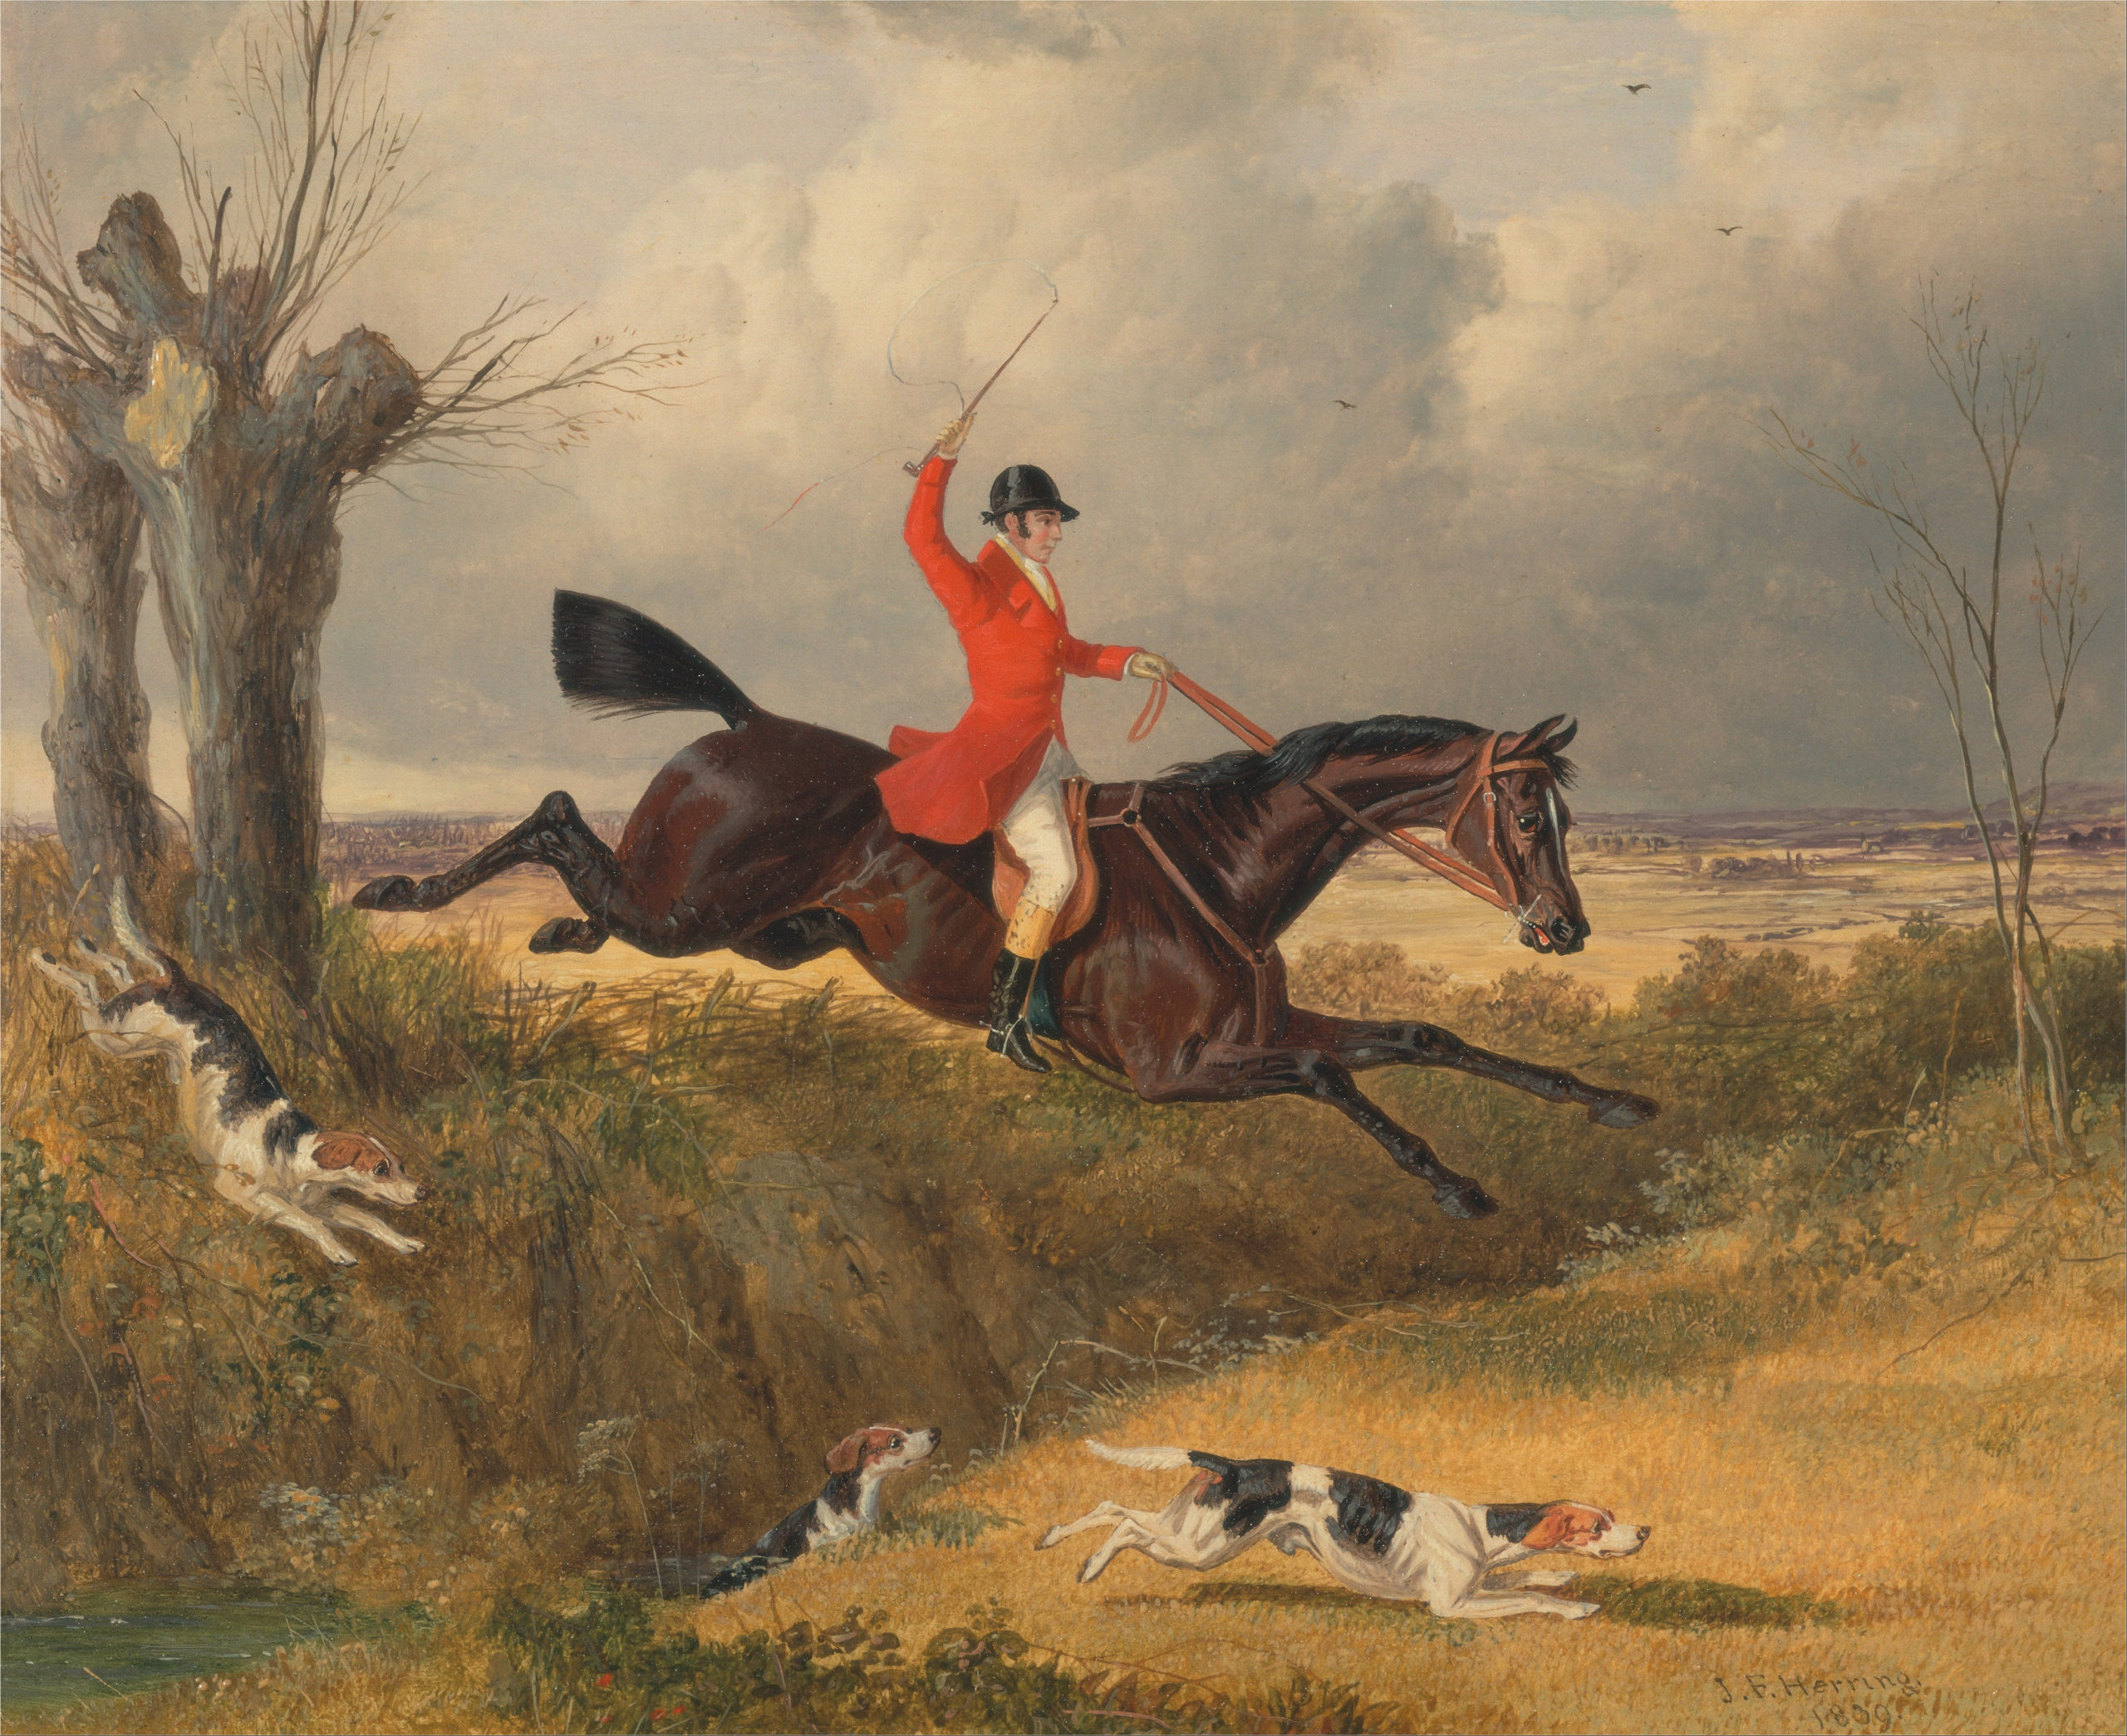 John Frederick Herring's 1839 painting, "Foxhunting- Clearing a Ditch"